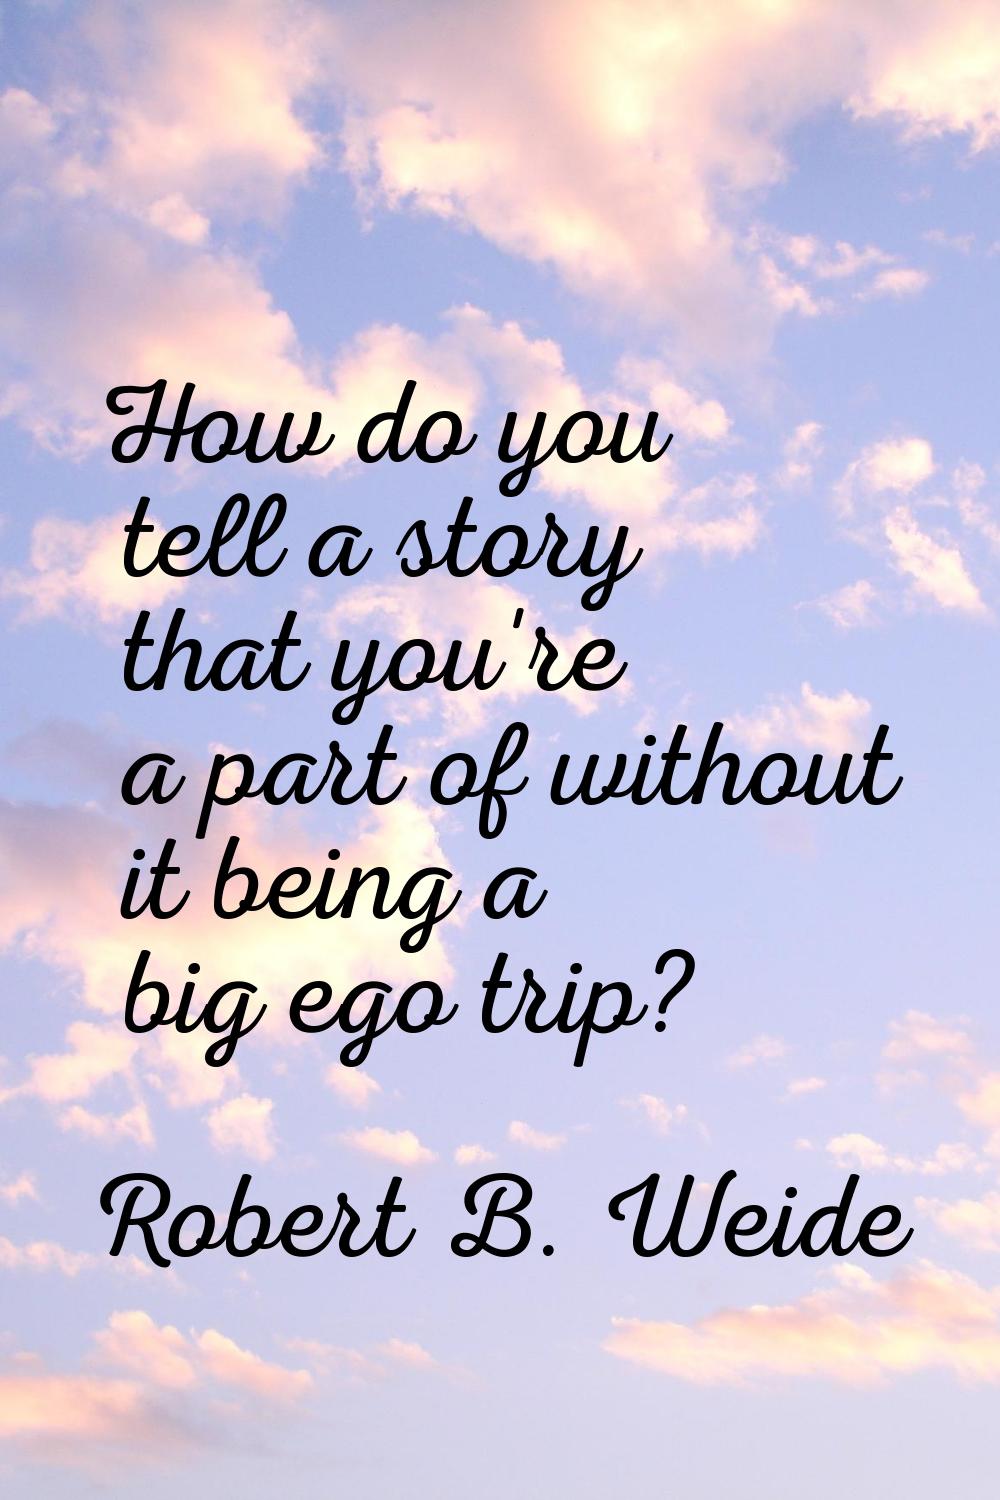 How do you tell a story that you're a part of without it being a big ego trip?